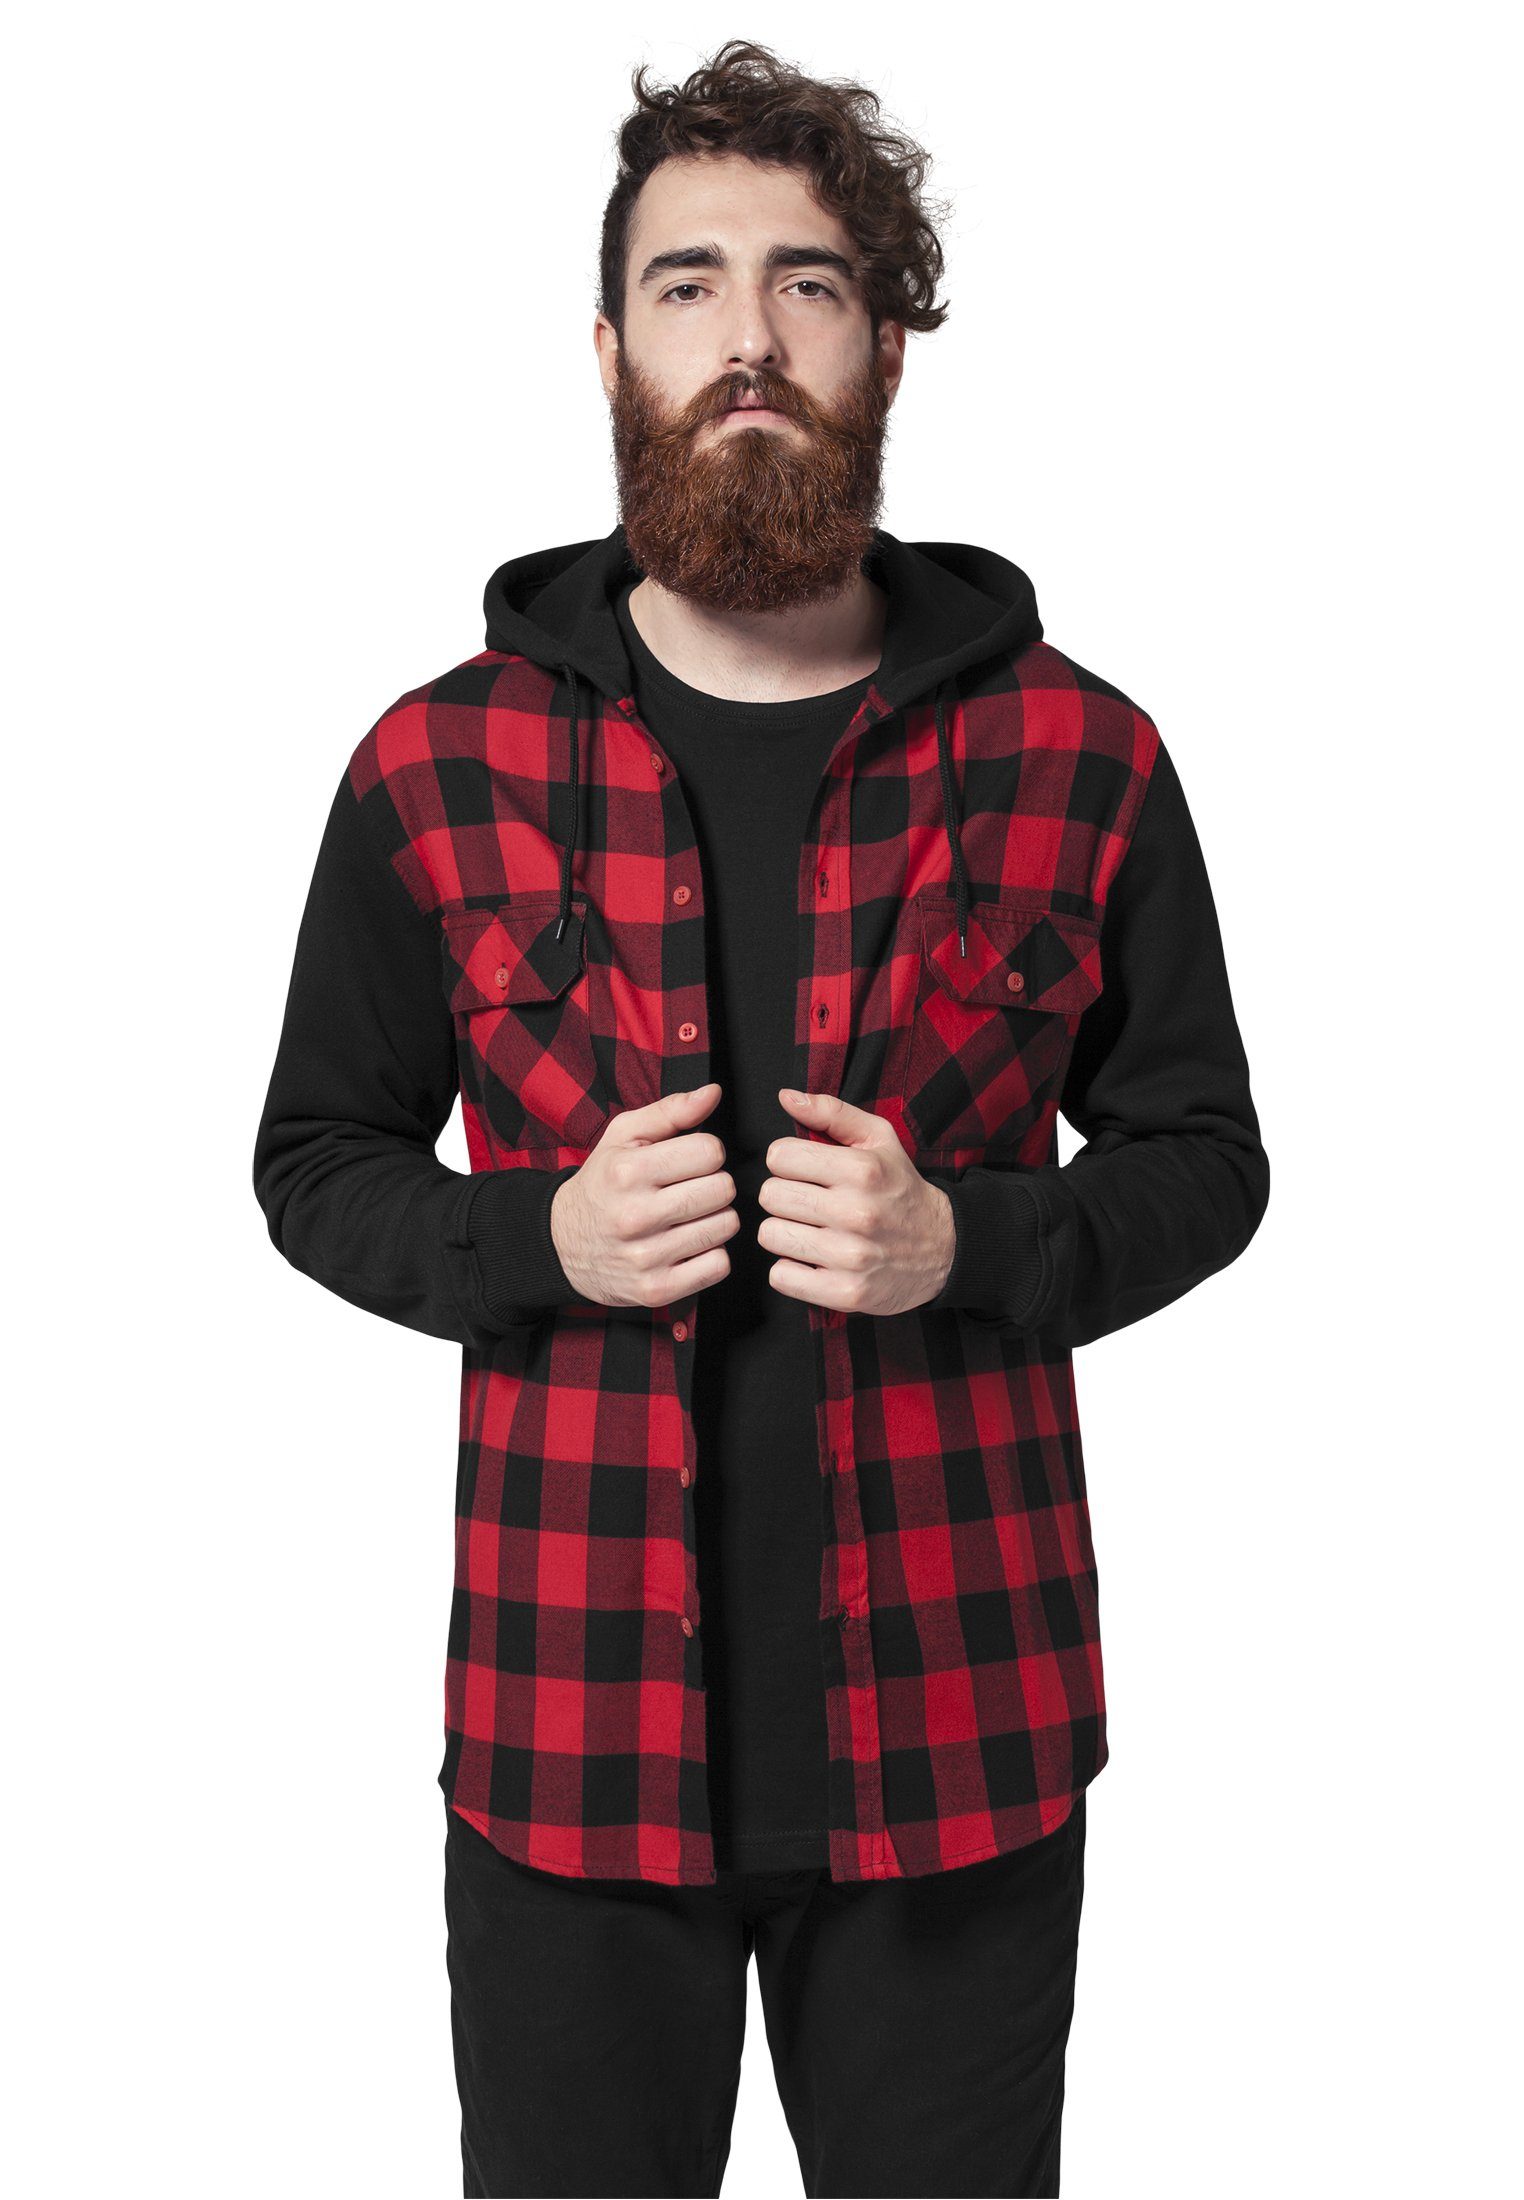 Herren CLASSICS URBAN Checked blk/red/bl Hooded Shirtjacke Sweat (1-tlg) Shirt Flanell Sleeve